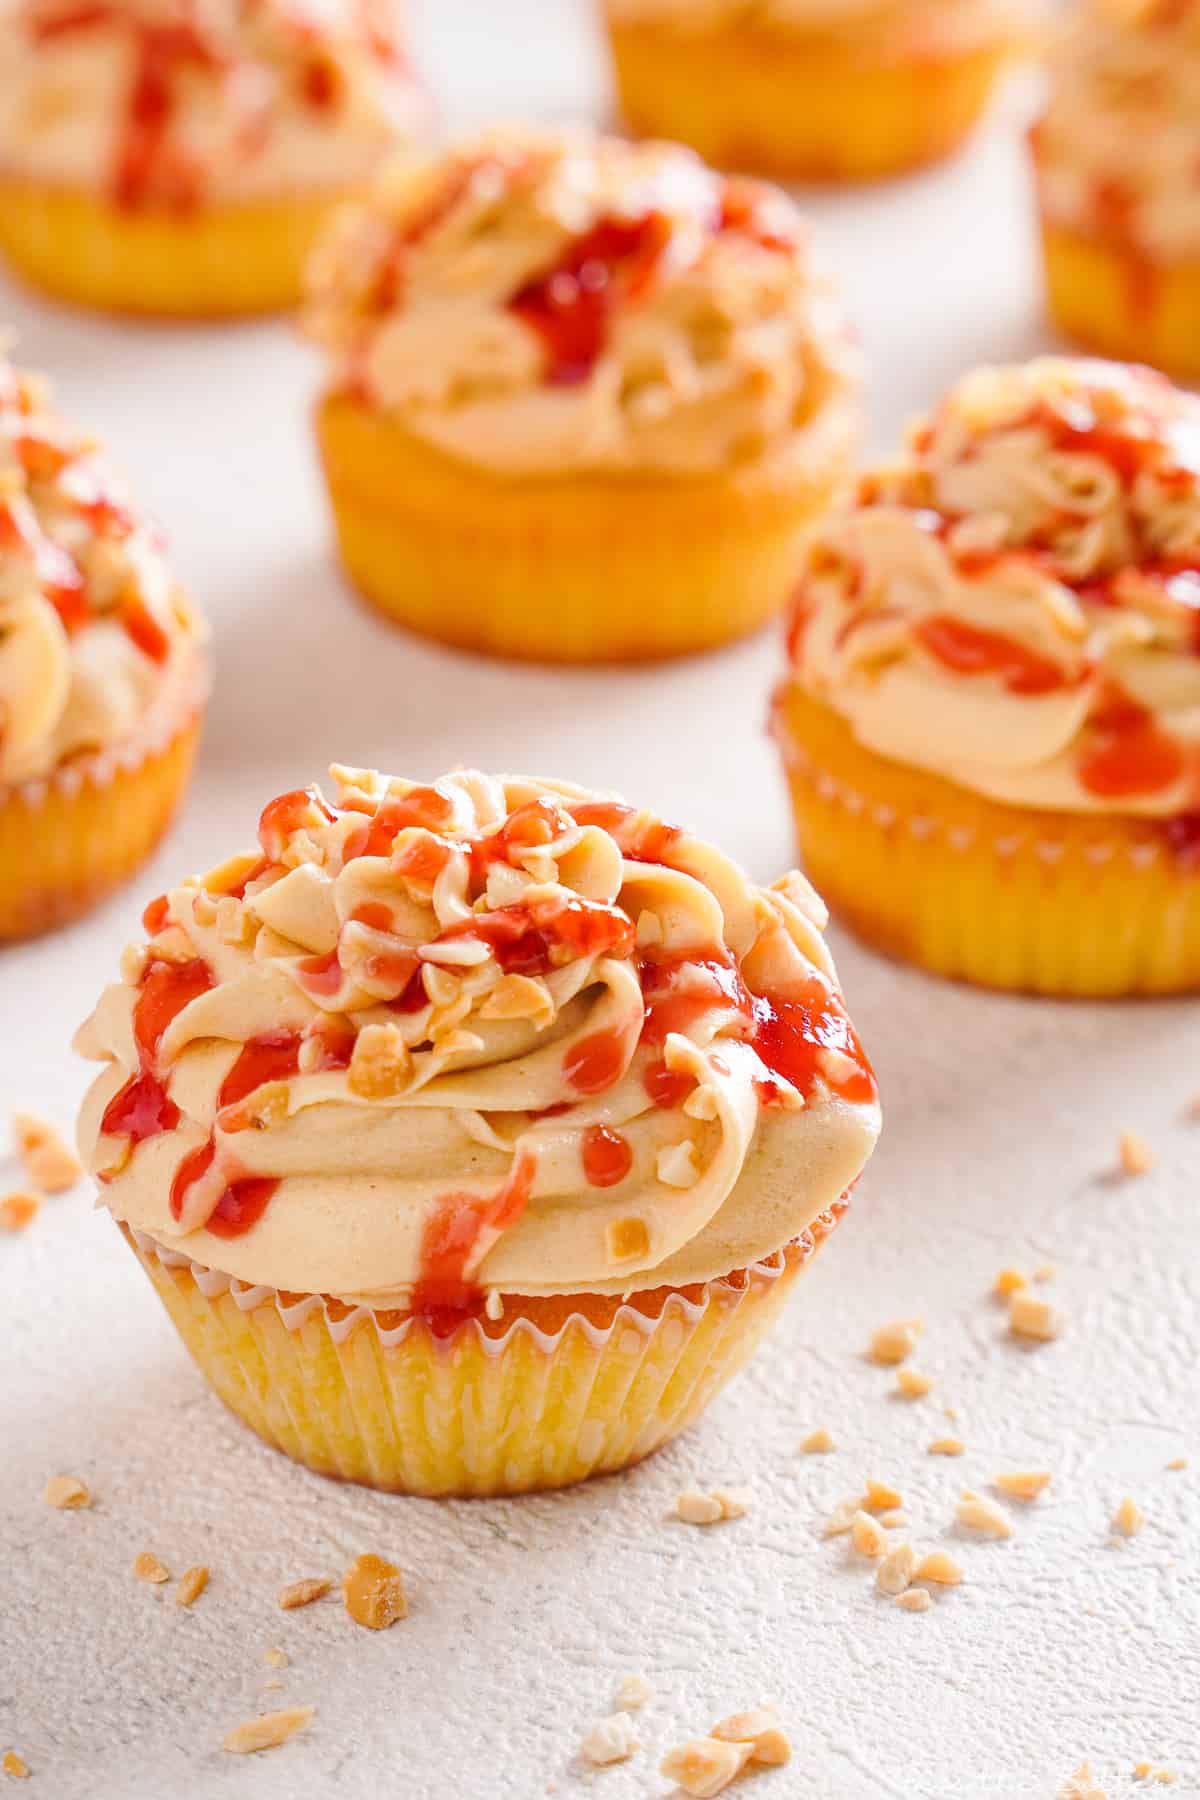 Close up view of peanut butter and jelly cupcakes.